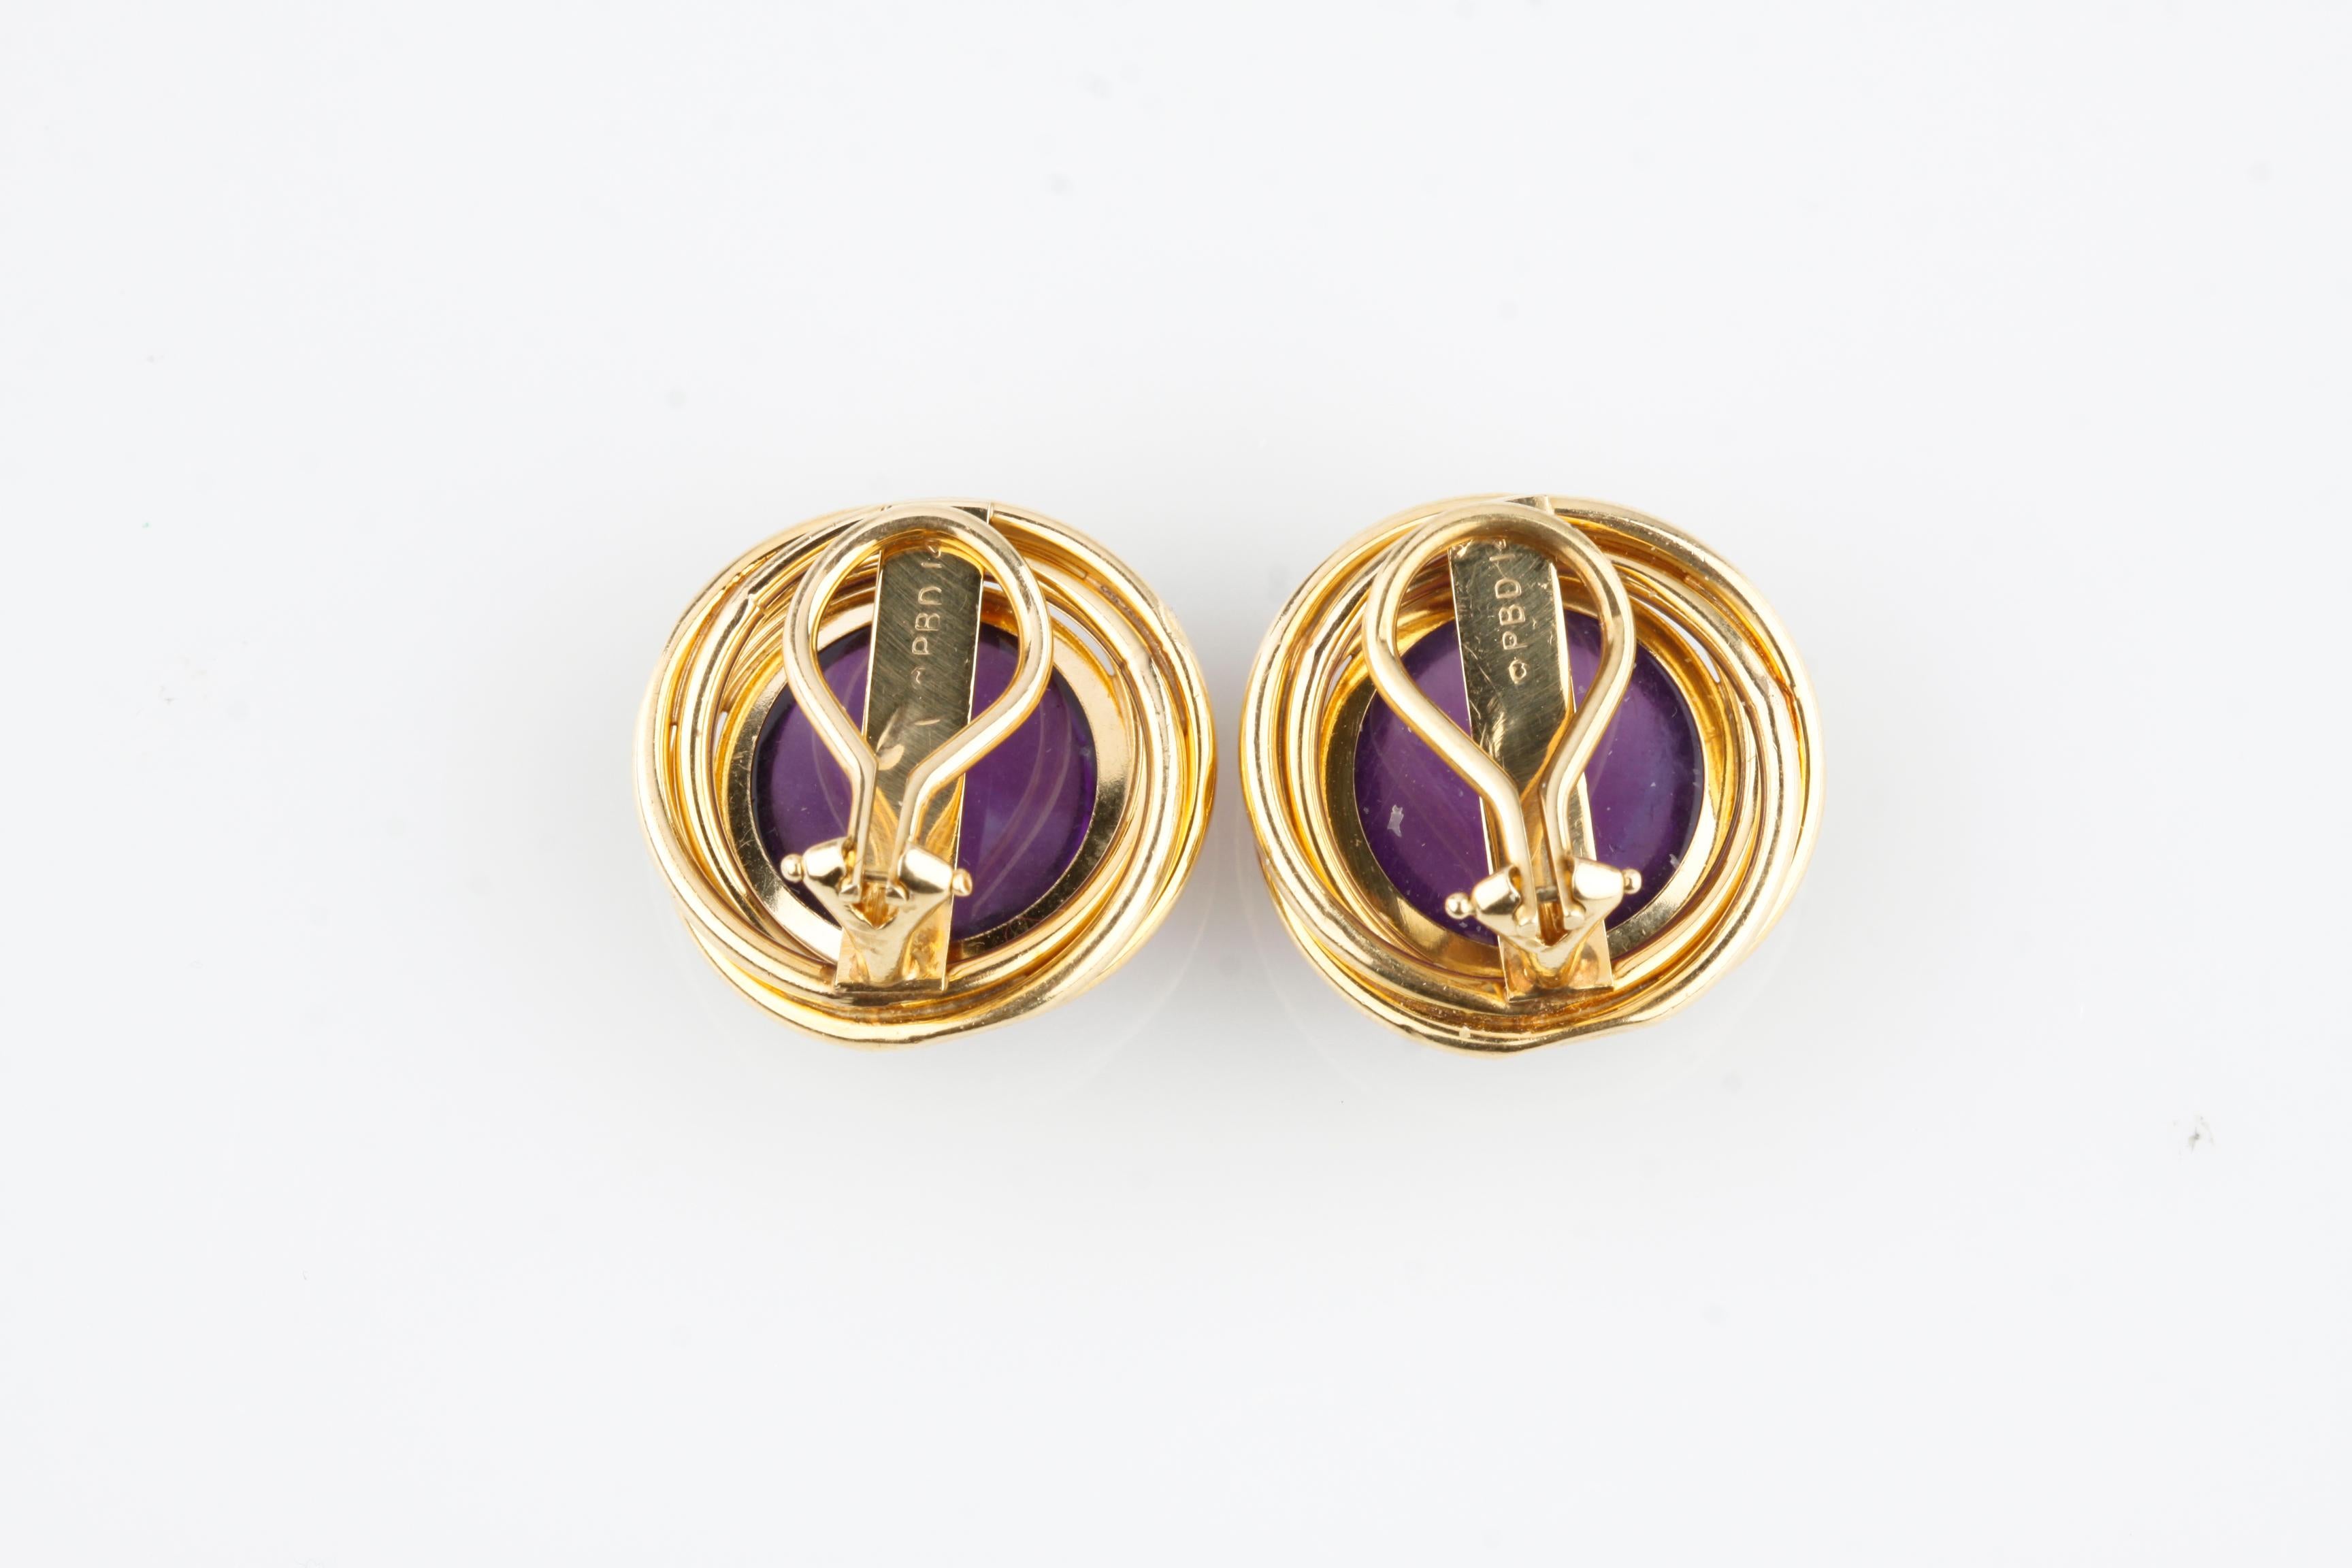 Gorgeous 14k Yellow Gold Round Clip-on Earrings by Peter Brams Designs
Feature Appx 2 Carats Amethyst Cabochons
Diameter of Earrings = 20 mm
Total Mass = 9.7 grams
Gorgeous Vintage Earrings!